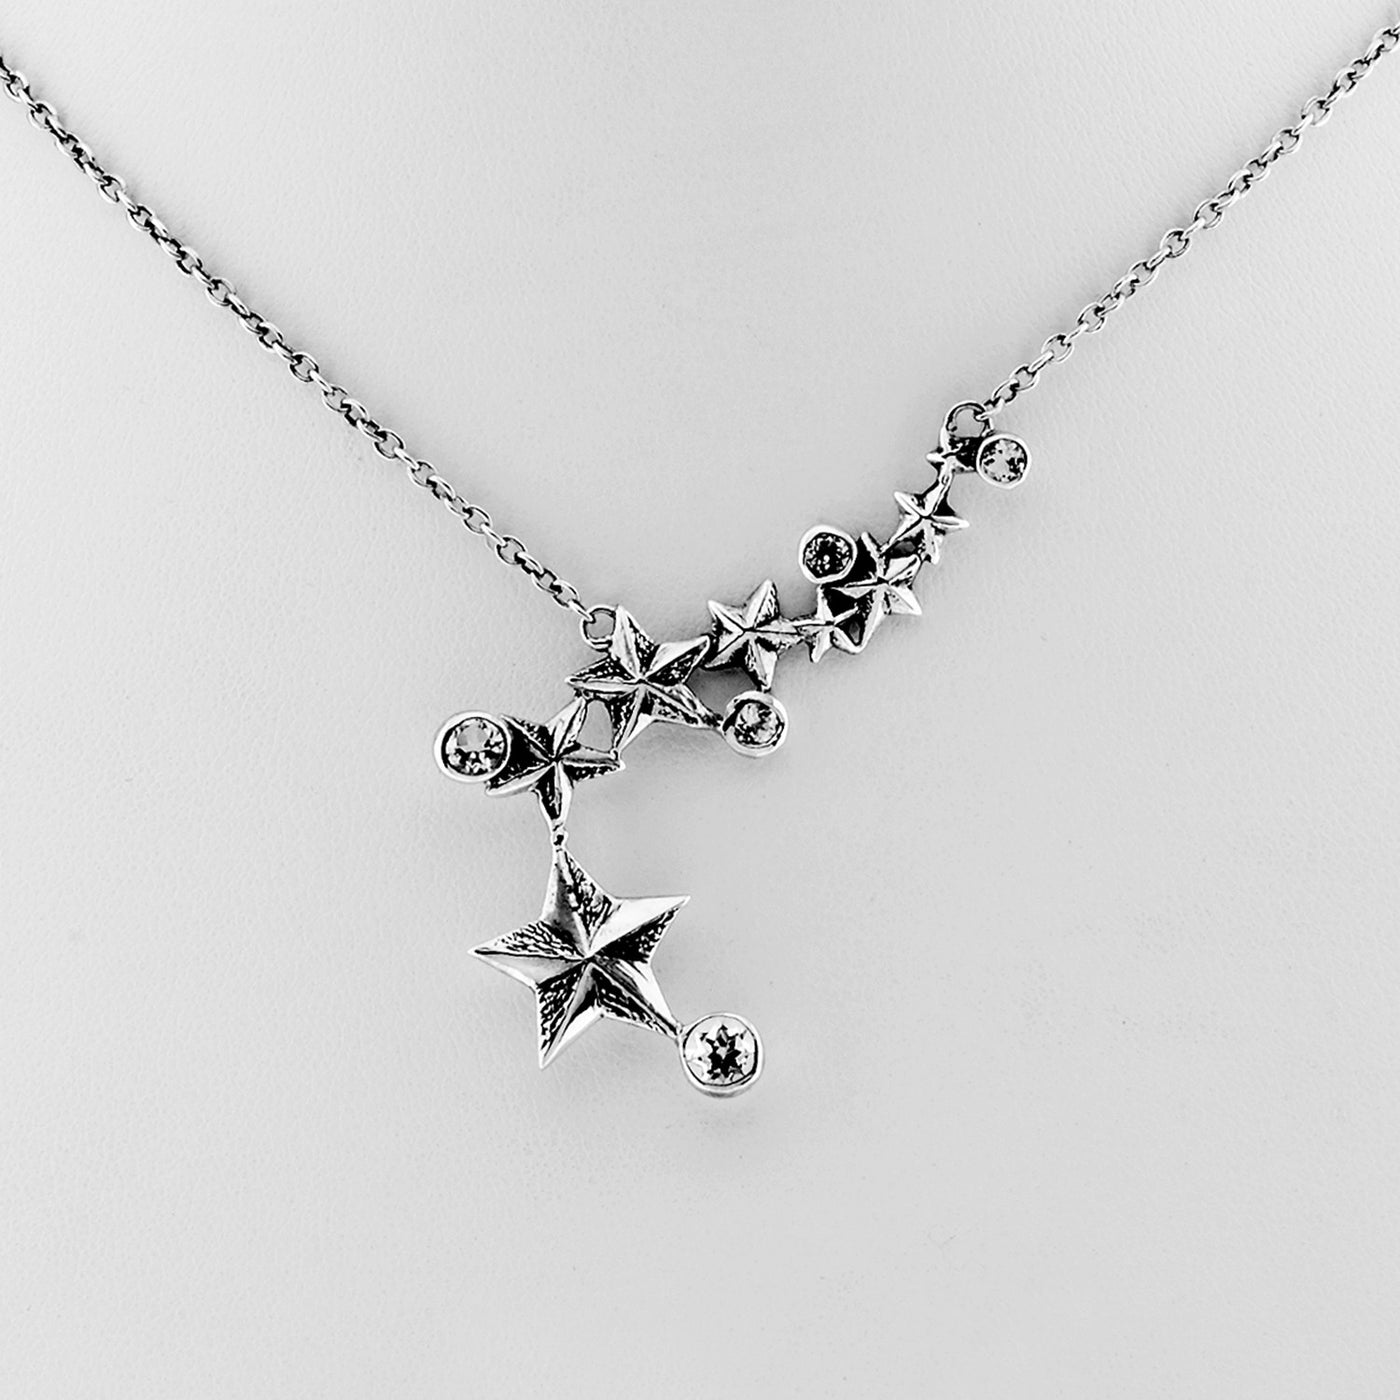 Rock Star Sterling Silver & White Topaz Necklace - Cynthia Gale New York - 2